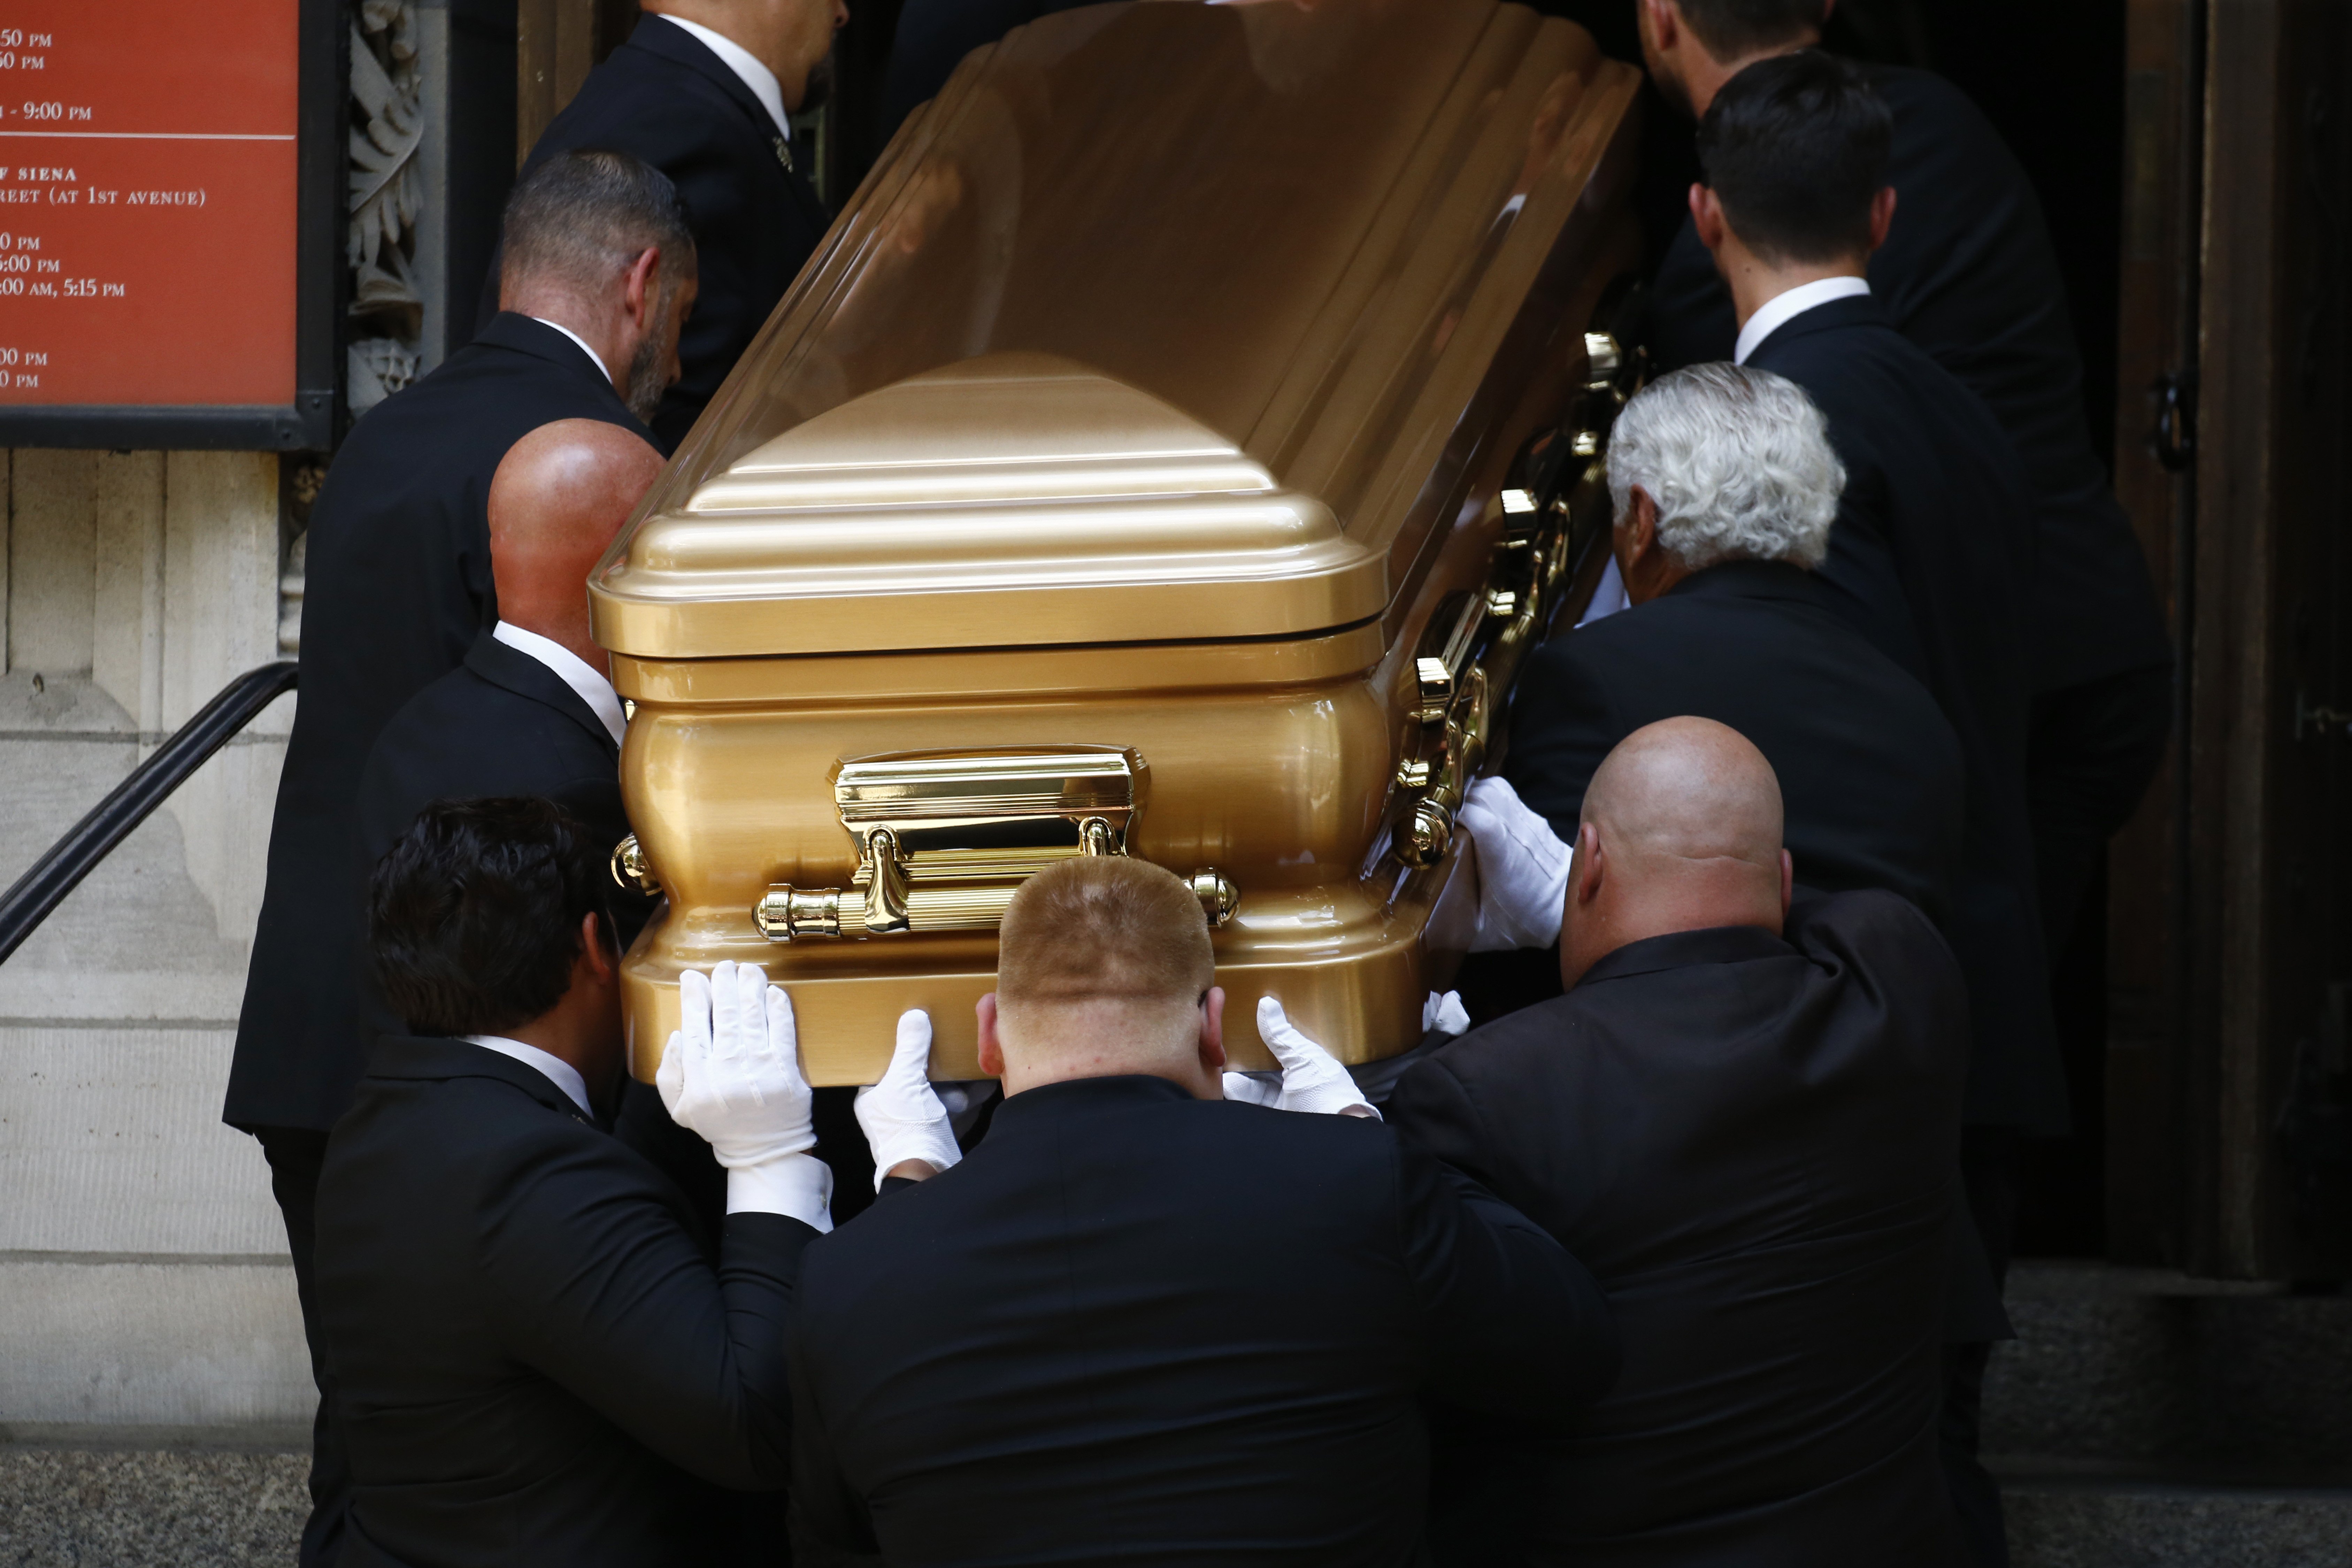 Pallbearers pictured carrying the casket at the funeral of Ivana Trump at St. Vincent Ferrer Roman Catholic Church on July 20, 2022 in New York City.┃Source: Getty Images